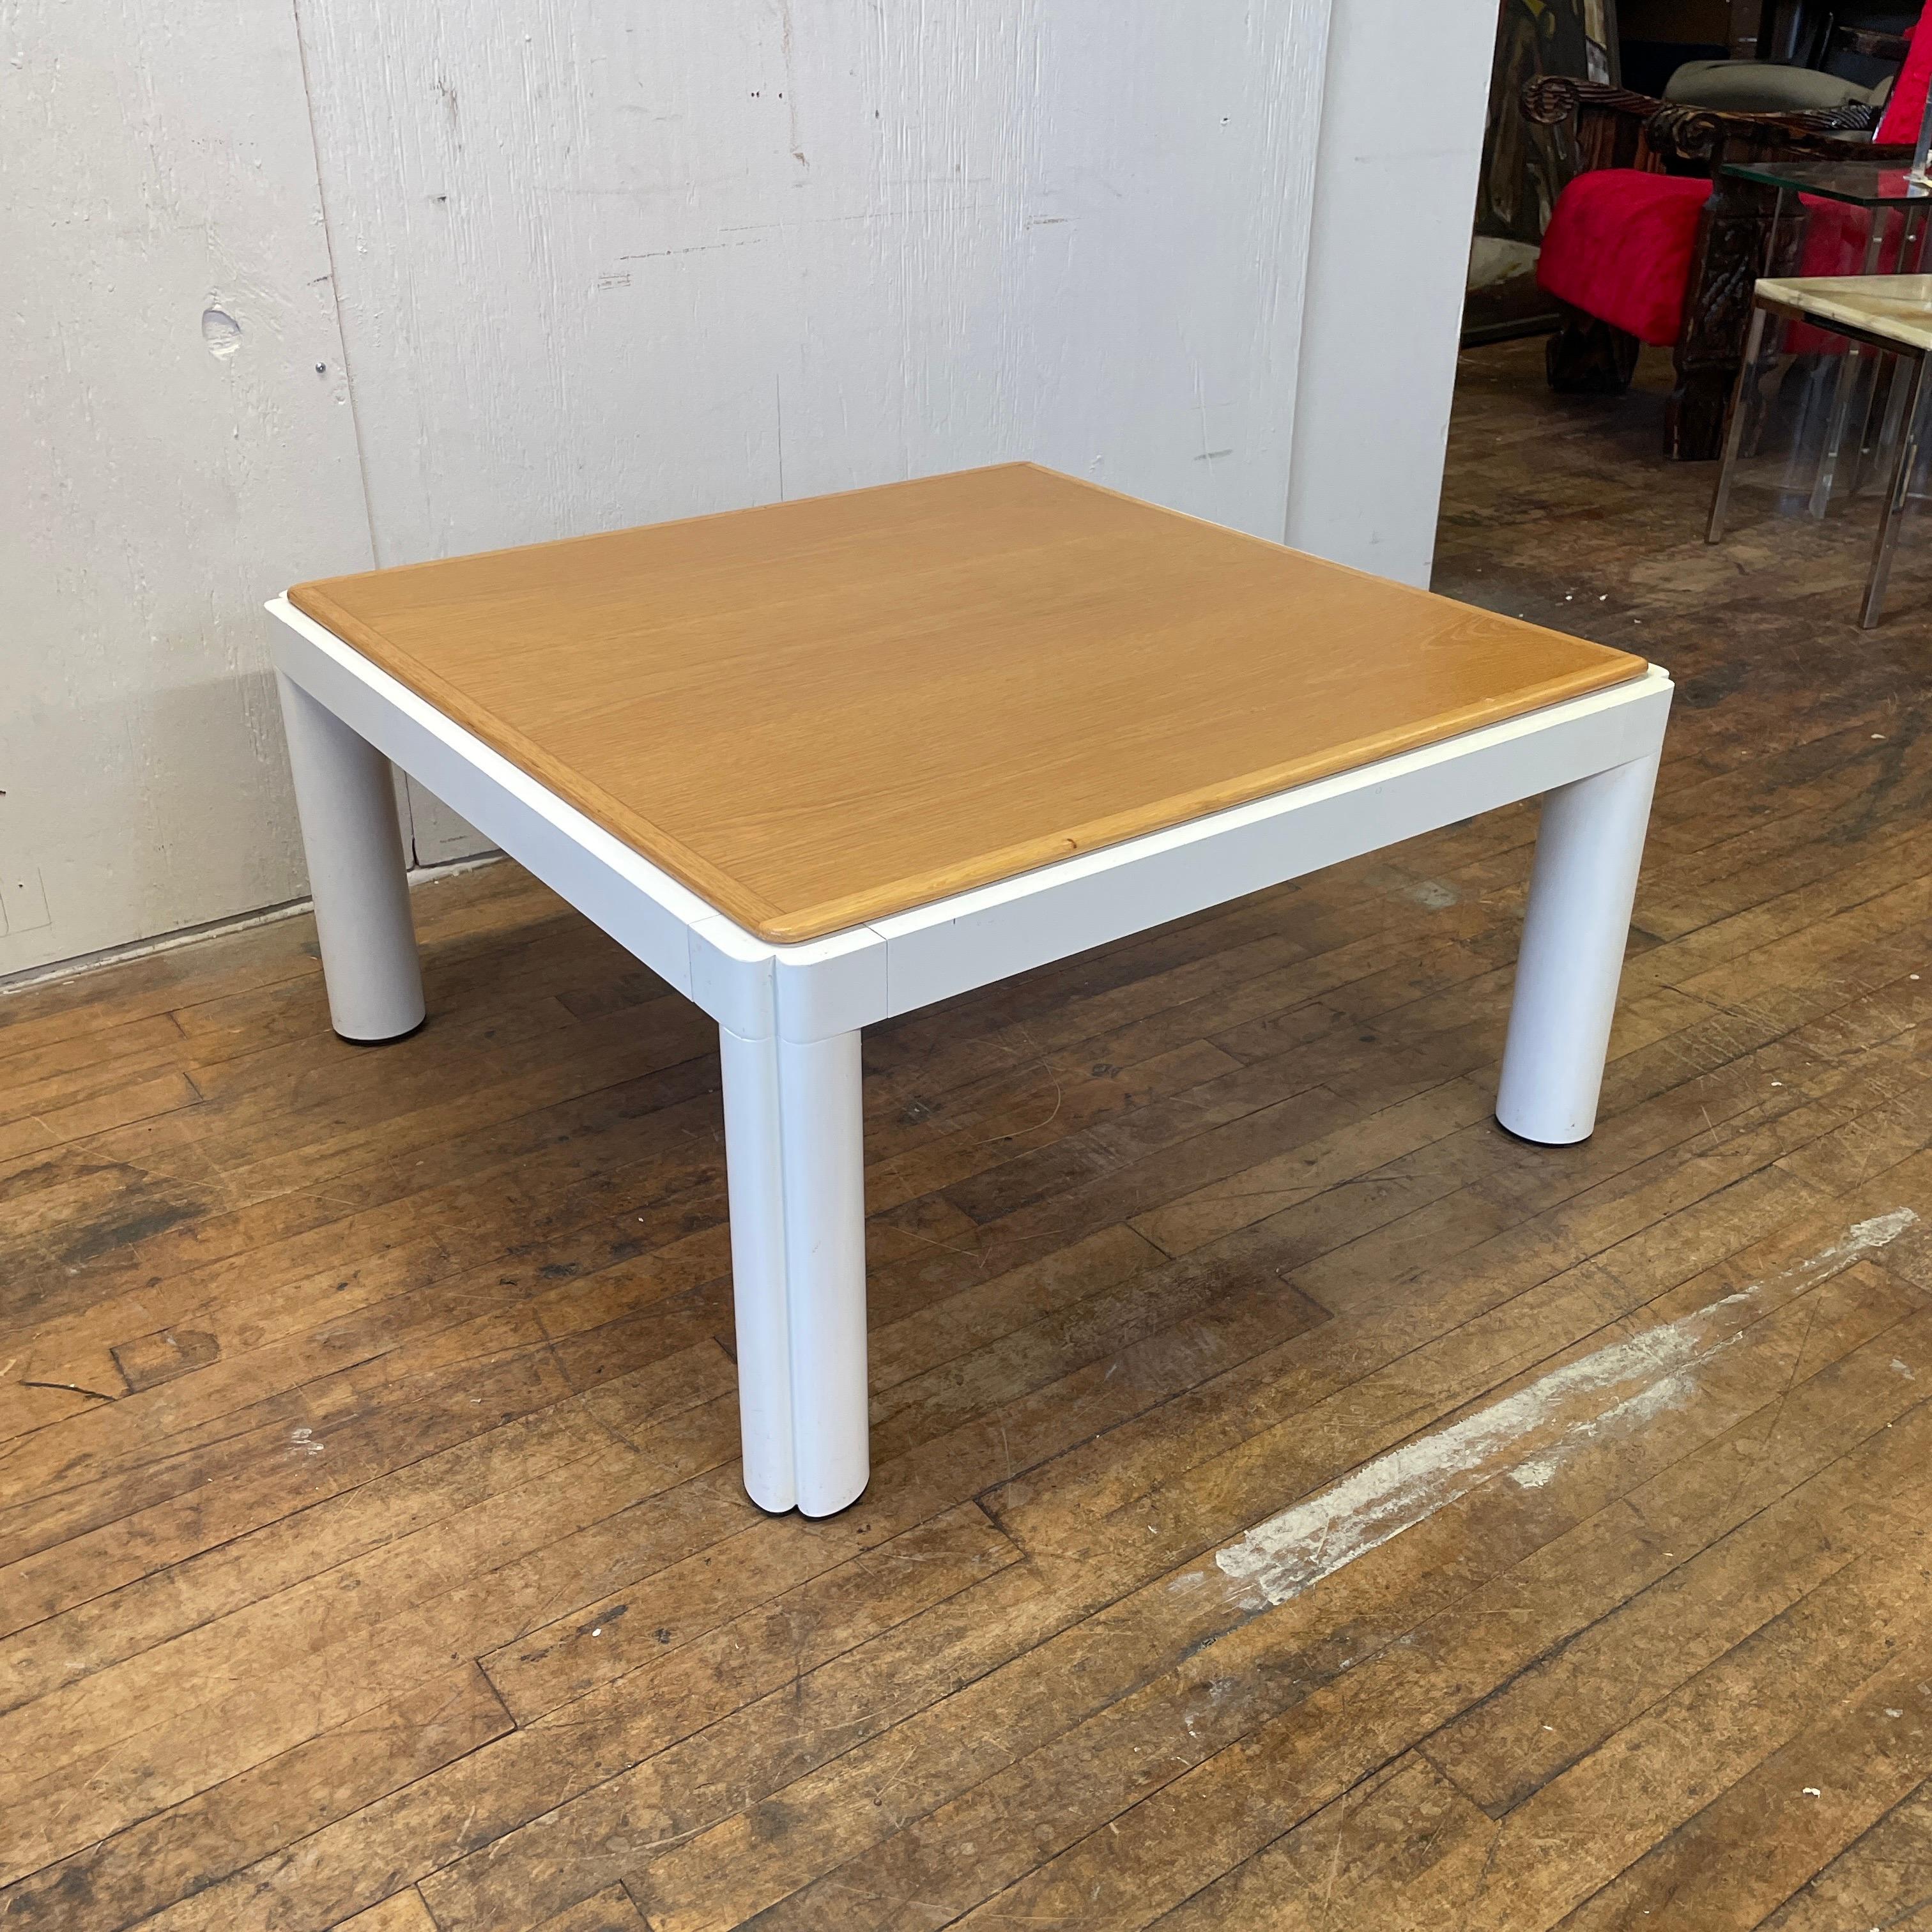 An Artifort coffee table designed by Kho Liang Le. This piece has a white metal frame with a removable wooden top. It is in great condition. The wood is clean and free of scratches, and there is no loss to the enamel of the frame.